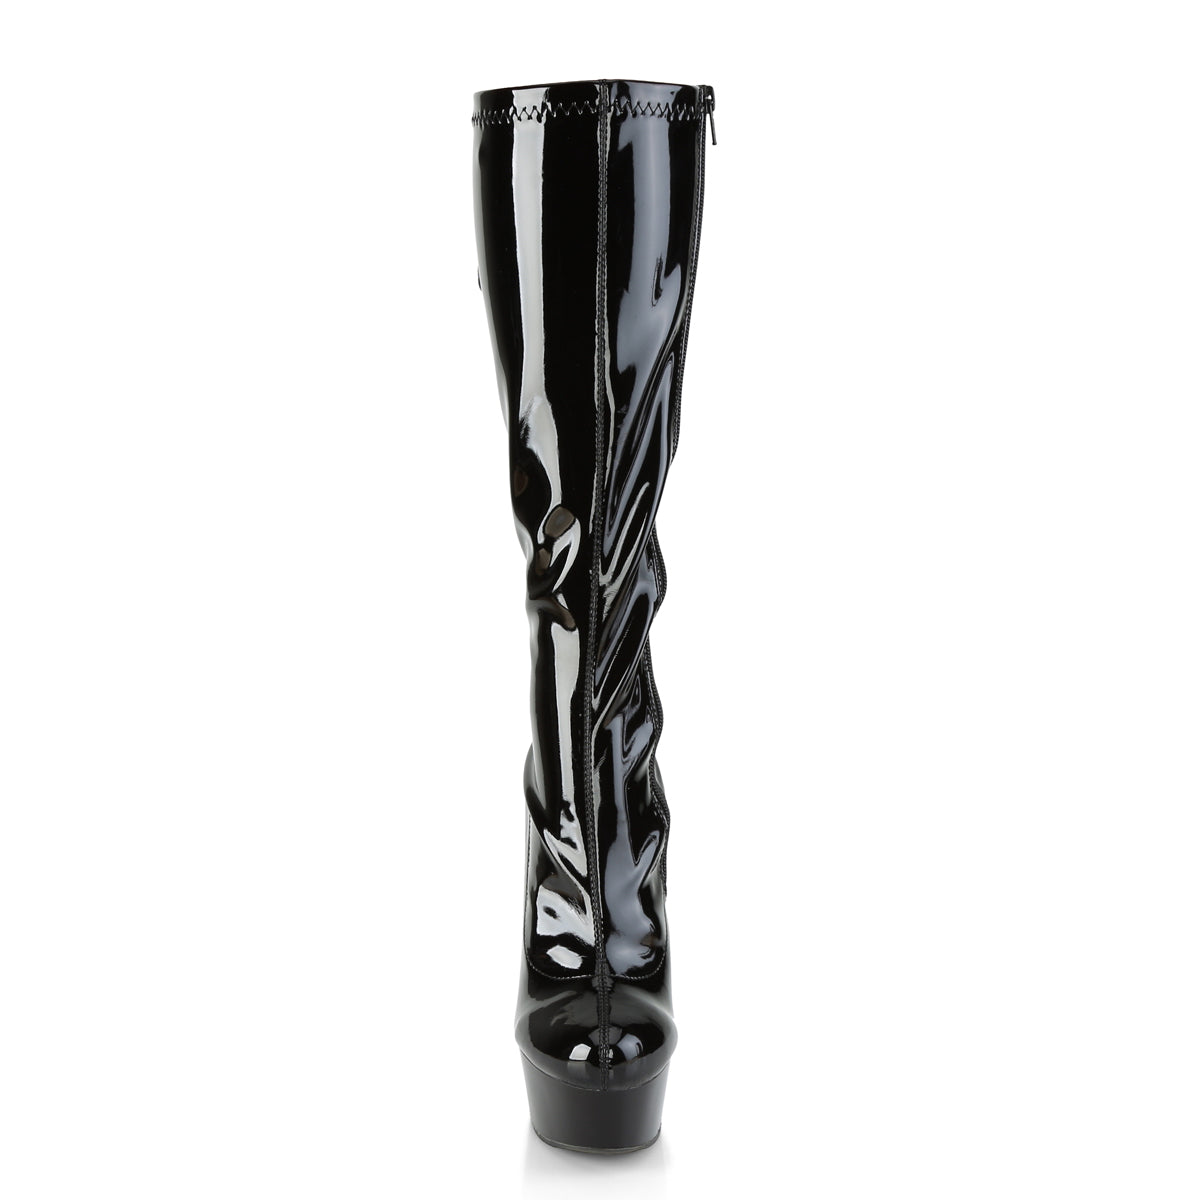 DELIGHT-2029 Black Knee High Boots